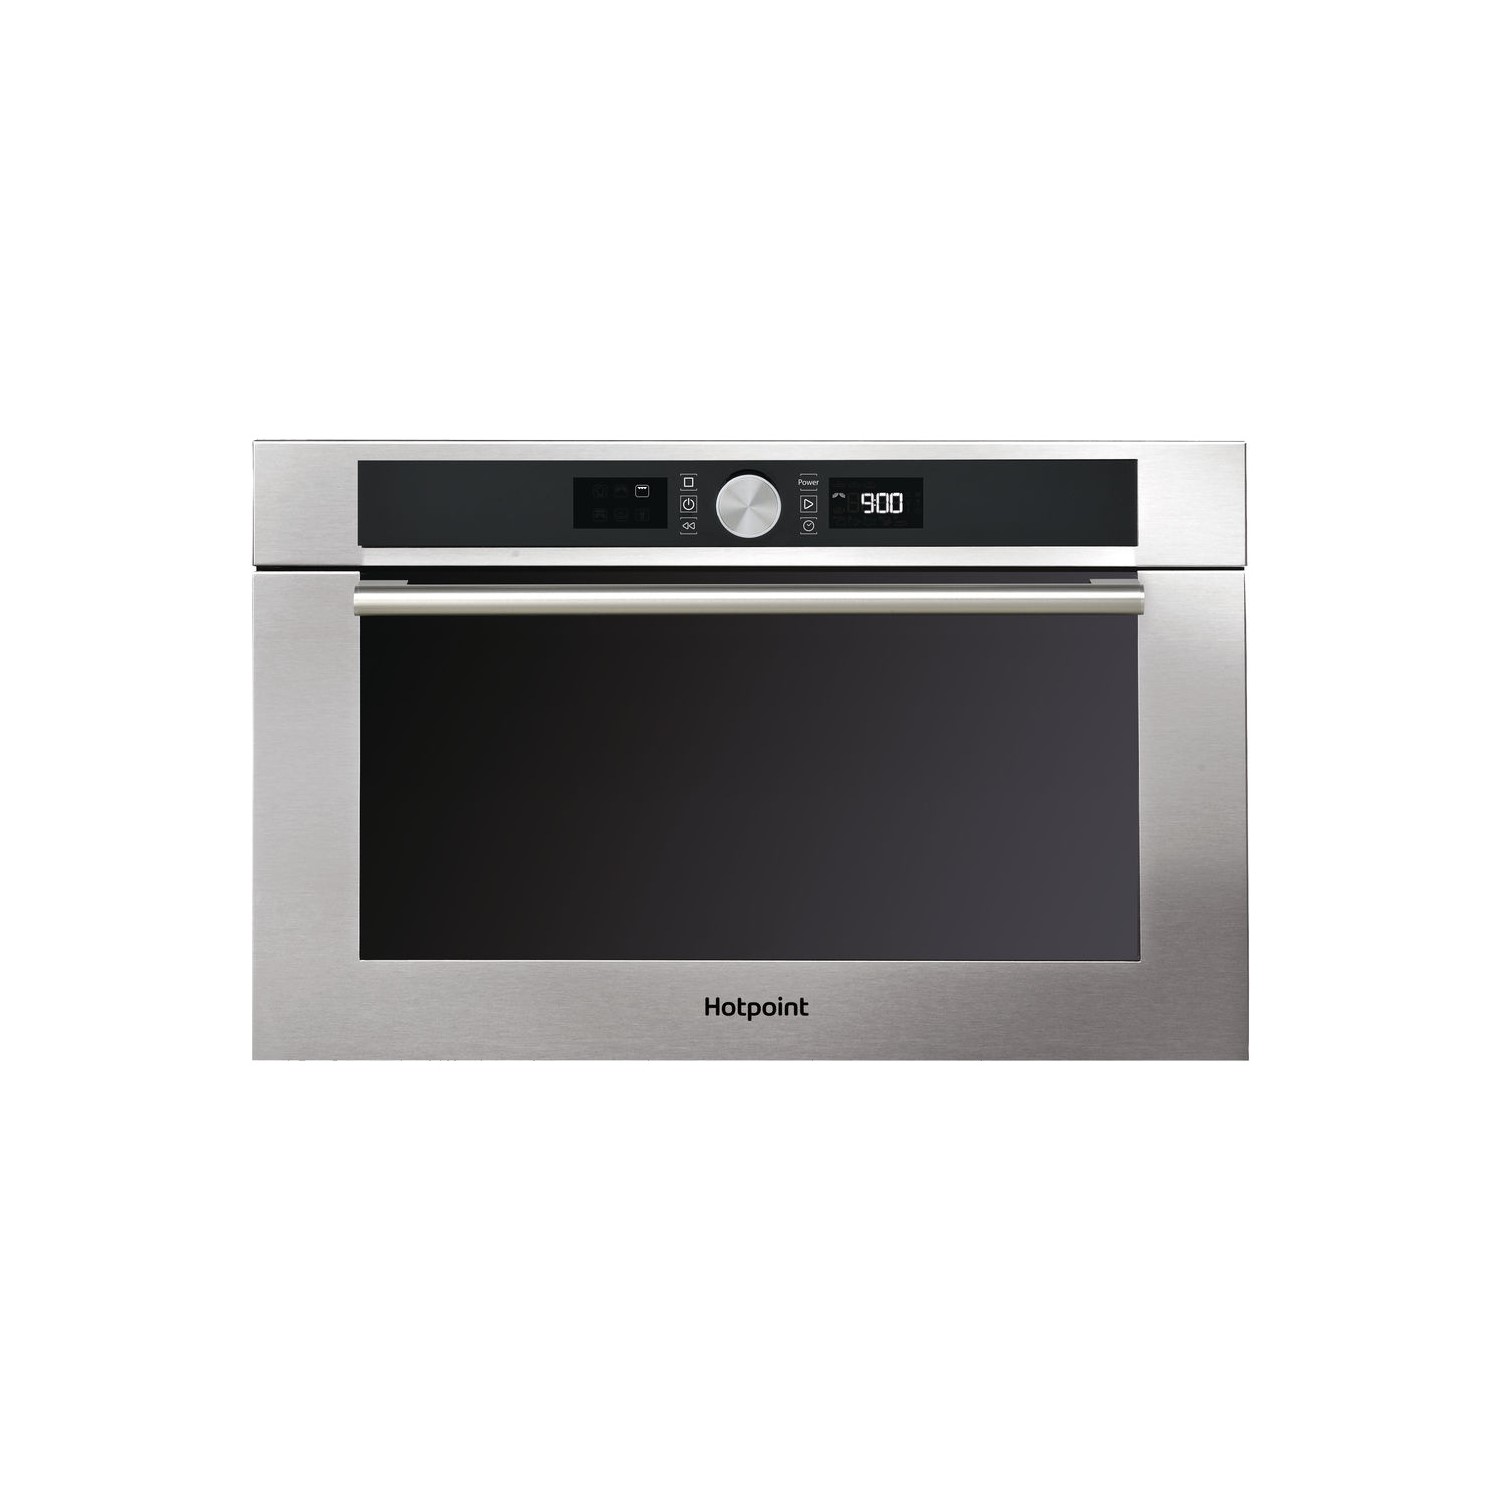 Hotpoint 31L 1000W Built-in Microwave Oven with Grill - Stainless Steel